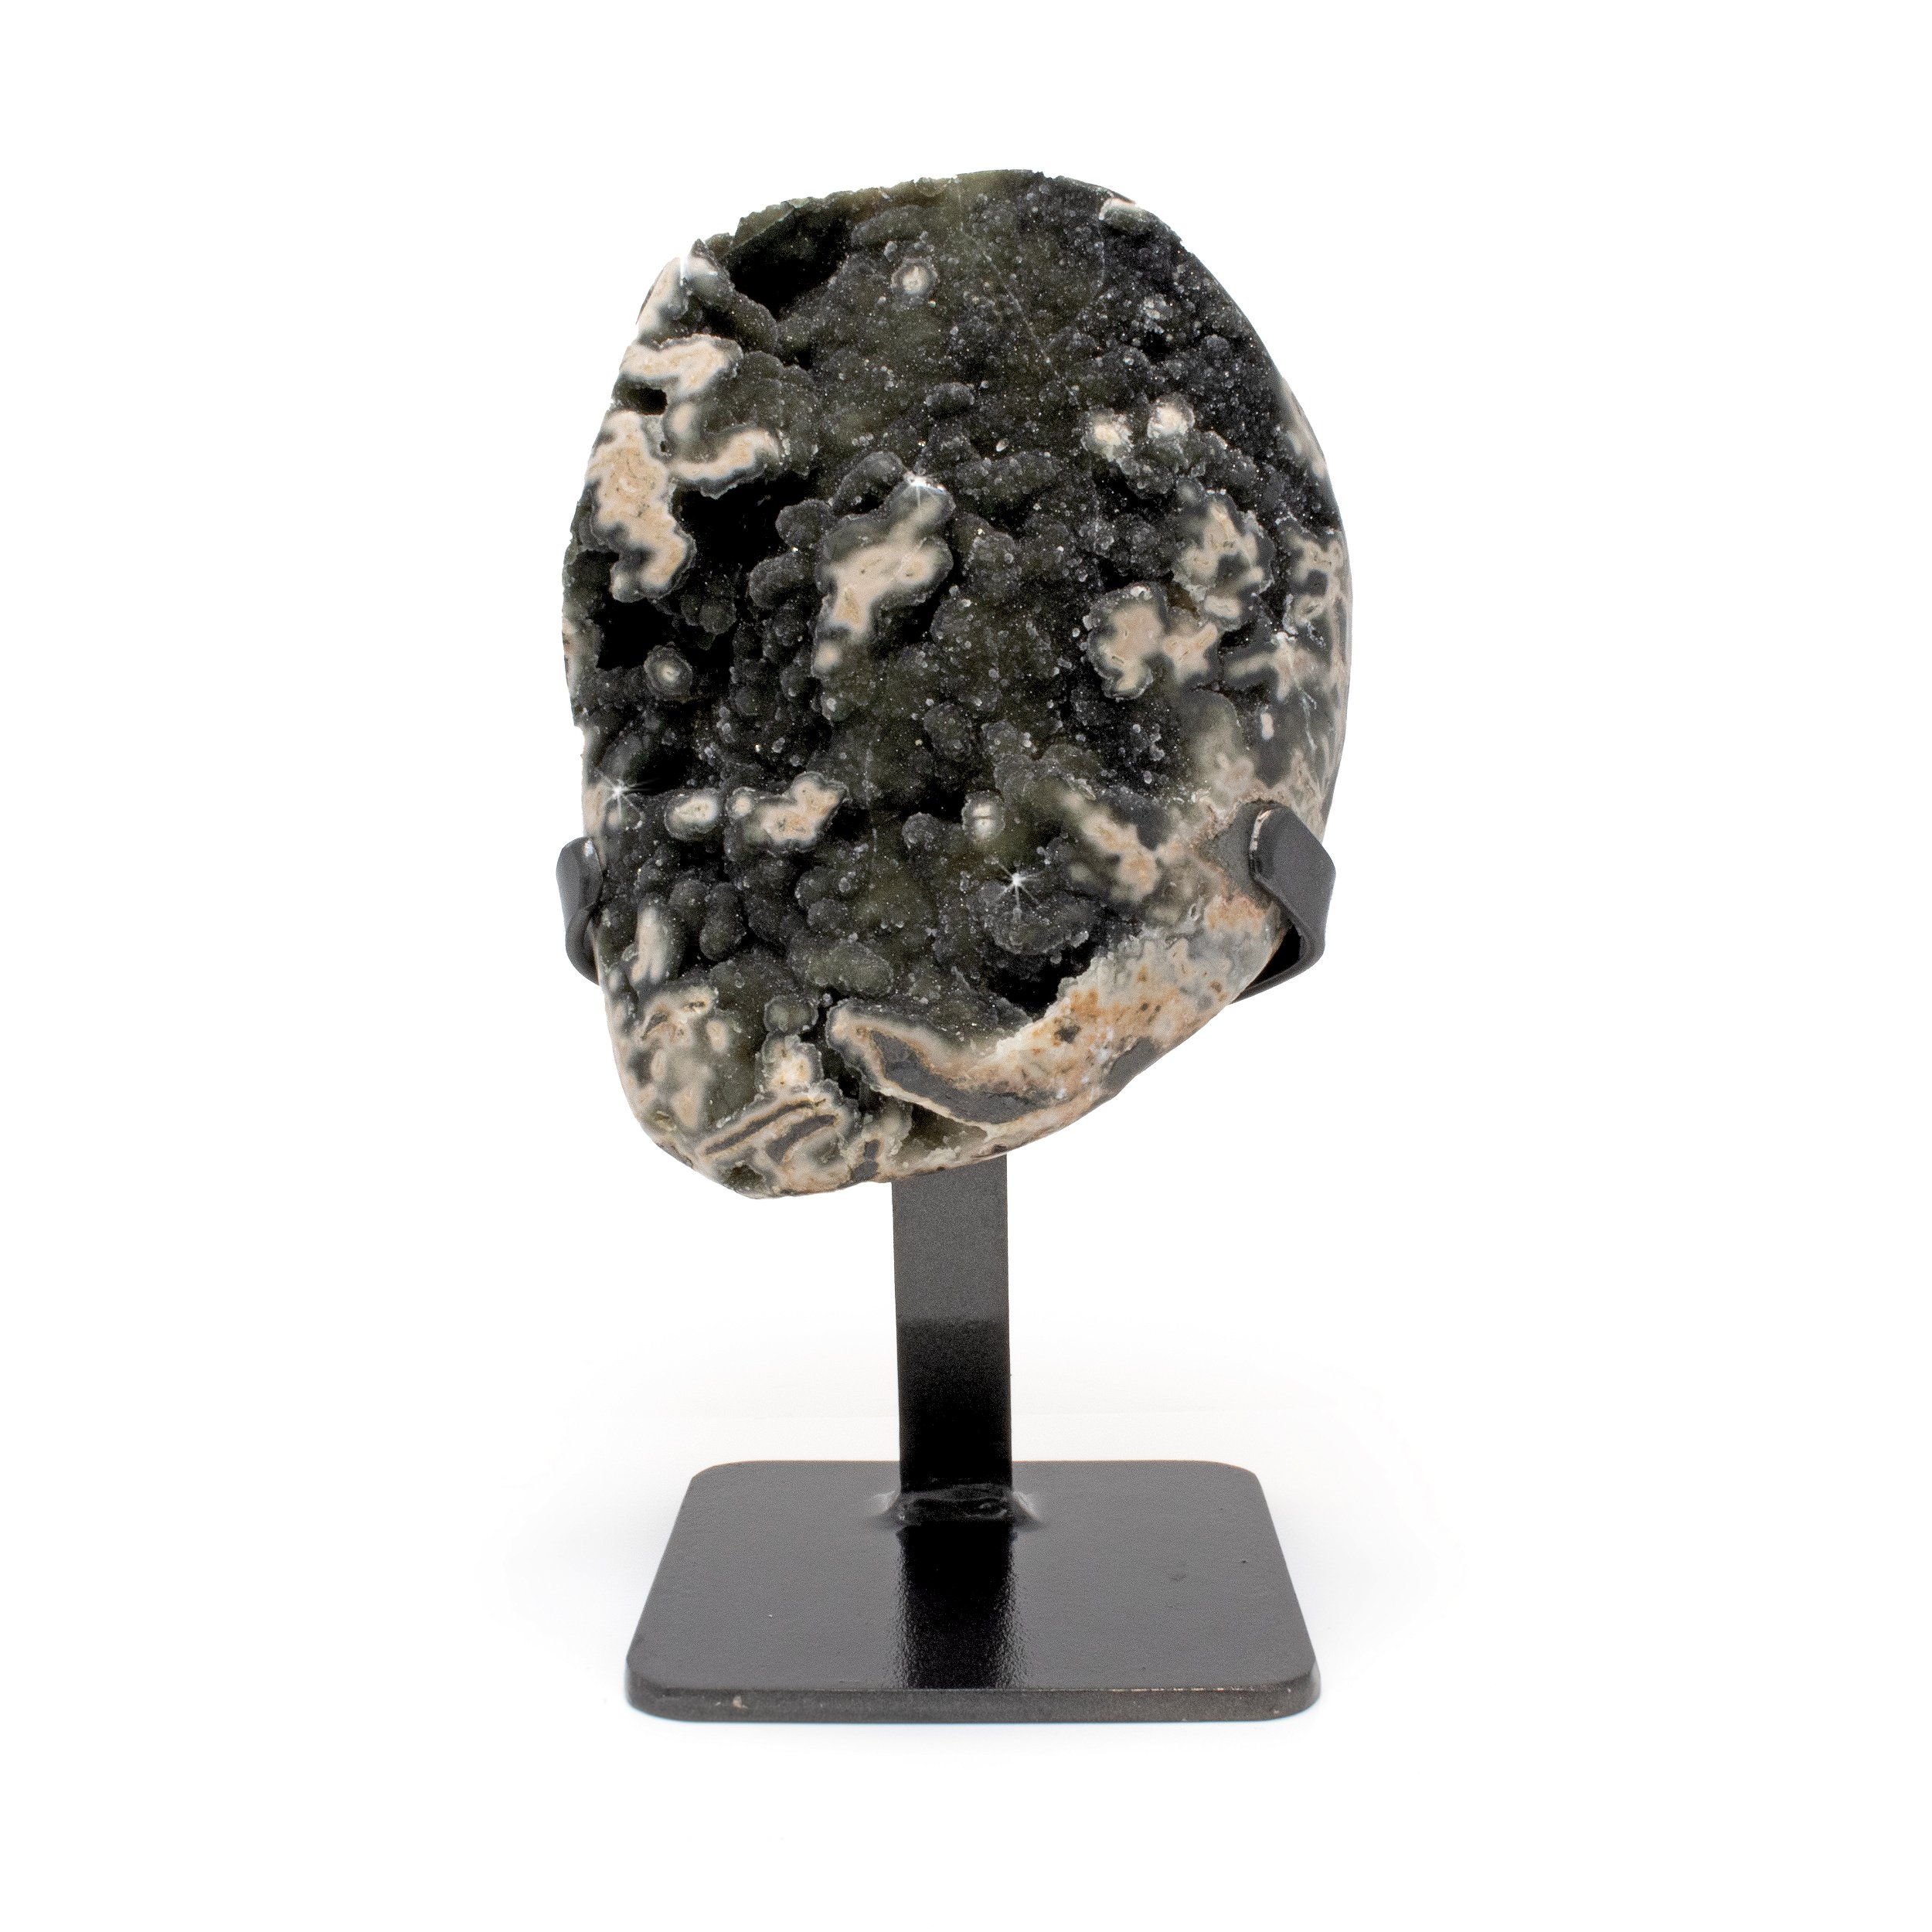 Dark Gray & Tan Druze Geode On Fitted Stand